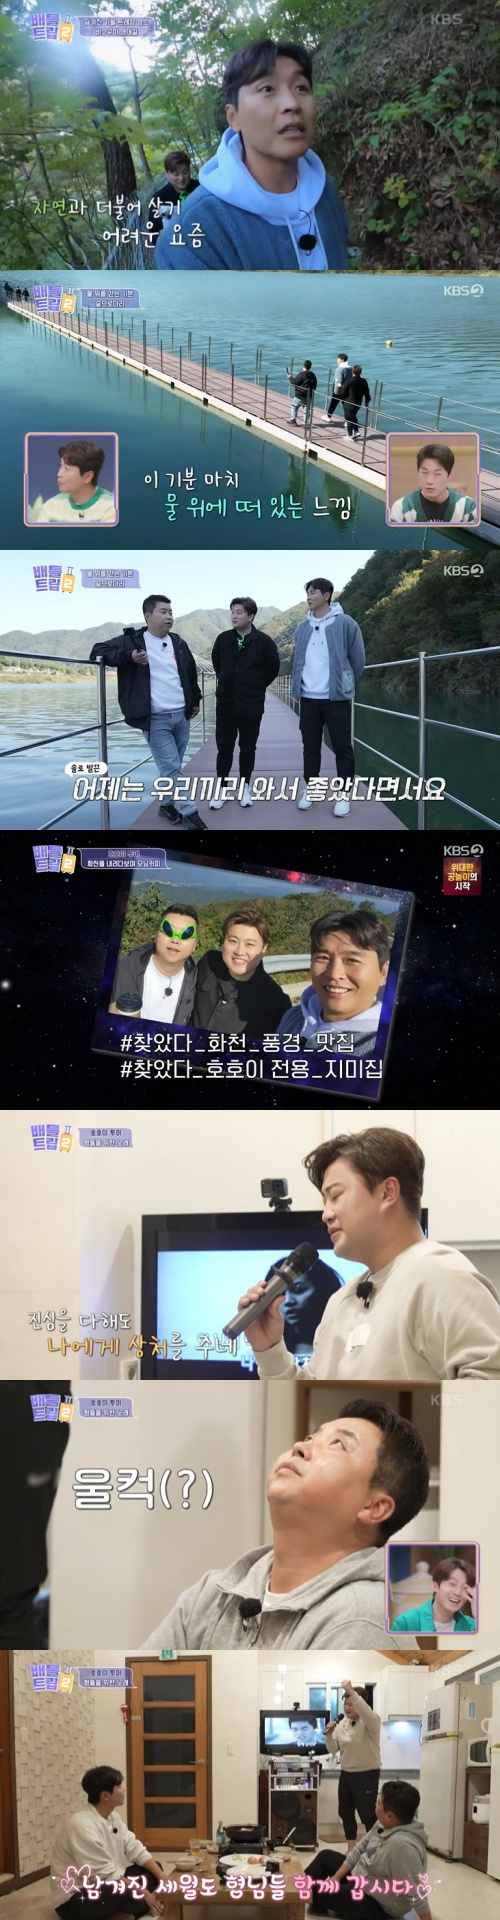 On the 19th broadcast KBS 2TV Battle Trip 2, Jeong Ho-young, Lee Dong-gook, Kim Ho-joongs Gangwon Province and South Korea Hwacheon Travel got on the air.The team of Jeong Ho-young, Kim Ho-joong and Lee Dong-gook, who took the theme of healing on this day, left Travel to Gwangwon Province, South Korea Hwacheon.First, Kim Ho-joong, who was driving with Jeong Ho-young, said, How long have we been going on a trip? Its been a long time since the Hoho Brothers have united. Yoon Doo-joon said, The combination of the three is fresh.Lee Dong-gook and newcomer Jeong Ho-young expressed their excitement, saying, I personally like soccer players. I couldnt sleep because I was excited yesterday.Jeong Ho-young arrived at the promised place and greeted Lee Dong-gook awkwardly.Jeong Ho-young greeted shyly saying I like it and Lee Dong-gook was embarrassed that it was very awkward and okay.Kim Ho-joong, who arranged the meeting between the two, was happy as the youngest, and Lee Dong-gook, who was in the car, laughed at the conversation with Jeong Ho-young after seeing the back of his head.The three people who came to the restaurant according to the navigation contacted the president of the restaurant. Then the motorboat appeared in the river. The three people who were surprised by the island in the land came out with an exclamation of the picturesque scenery as soon as they set off on the motorboat.The three traveled to the village by boat along the upper Paro Lake. As the boat speeded up, Kim Ho-joong said, This is the first time I have eaten rice so spectacularly.It is good to come to Hyodo sightseeing with my brothers. He laughed with a distorted face in the wind.Then the three of them arrived at the village of Bisugumi, where four families lived, and the three men who went to the Restaurant ordered wild vegetables and chestnuts.Lee Dong-gook, who ate wild bibimbap, said, I ate a lot of bibimbap in Jeonju and it seems to be the best. There are many kinds of herbs and fresh.I feel healthy, Kim Ho-joong, who ate a mouthful of bibimbap, admired, The aroma of adrenaline spreads. Then the night came, and Jeong Ho-young, who tasted it, said, Why is it so cold? It looks like jelly.I have never felt such a texture before. The three then joined Makgeolli in a tavern full of more than 100 traditional liquors, and later shared a glass of wine with chef Jeong Ho-young at the hostel.Jeong Ho-young said, All three people are busy in Seoul, but its so convenient to come here. I want to travel longer later, and Lee Dong-gook agreed, saying, I think we really need some time like this.At this time, Kim Ho-joong opened a karaoke machine called Thank you, and Jeong Ho-young finished the friendship travel of three men with tears.